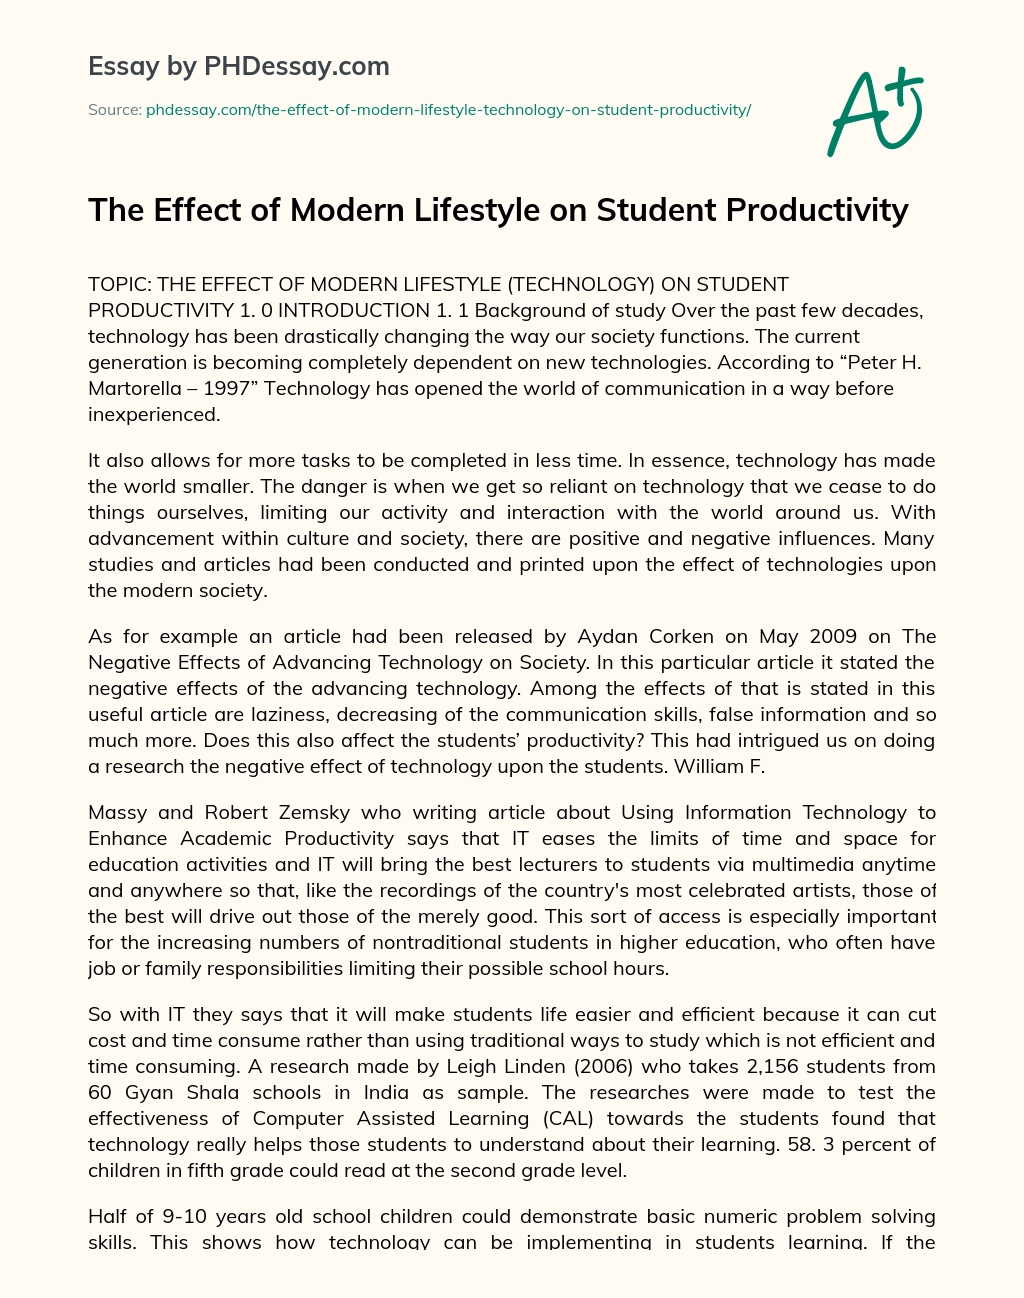 The Effect of Modern Lifestyle on Student Productivity essay